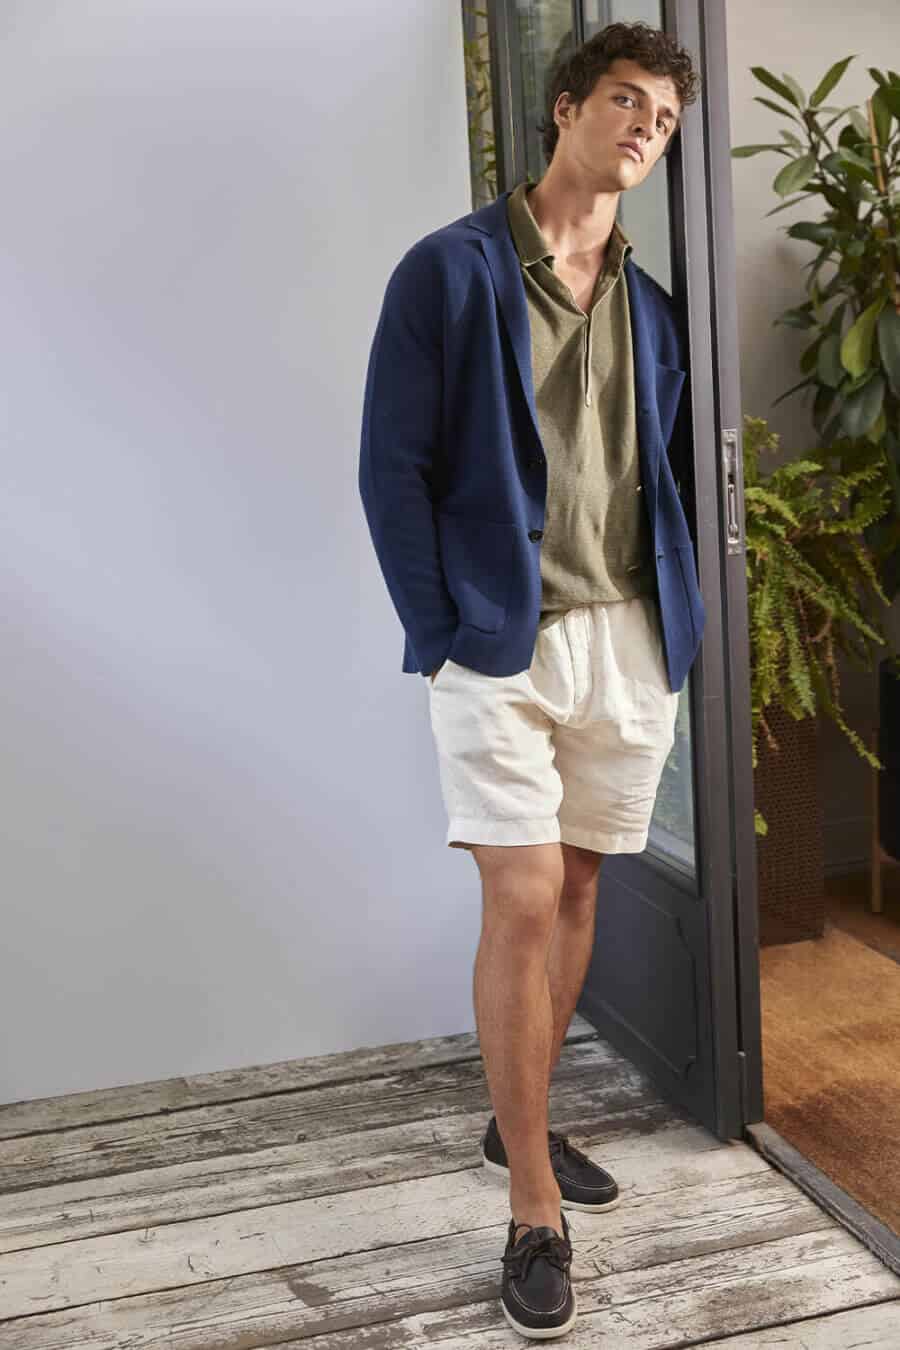 Men's tailored shorts worn with knitted polo shirt and unstructured blazer outfit